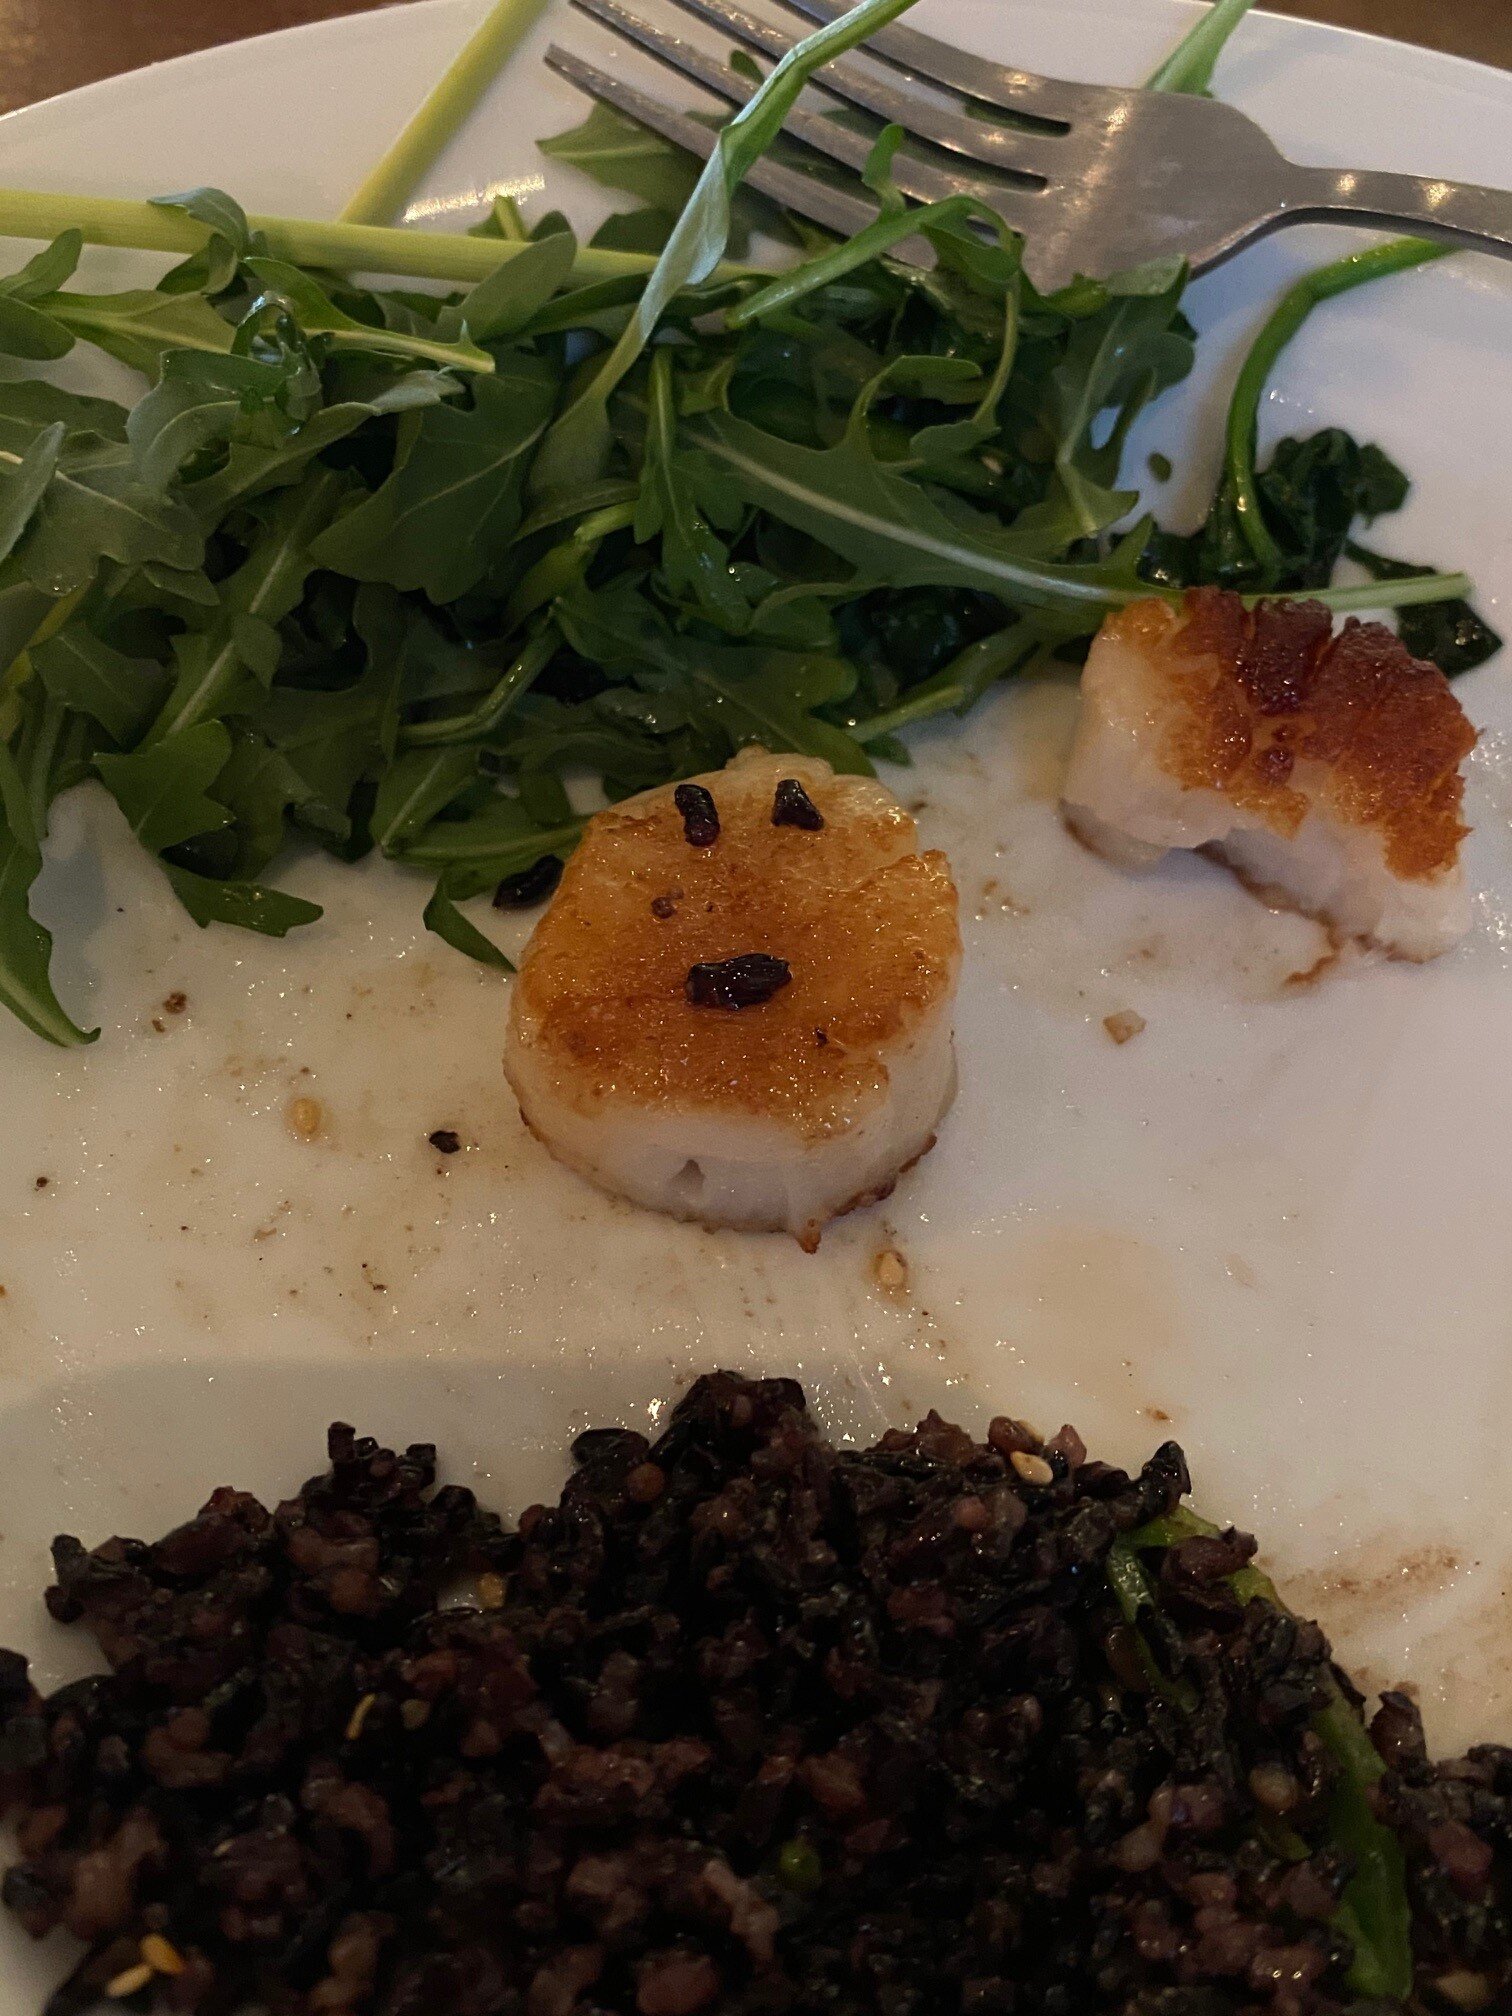 Flipped my scallop and it said "hello"